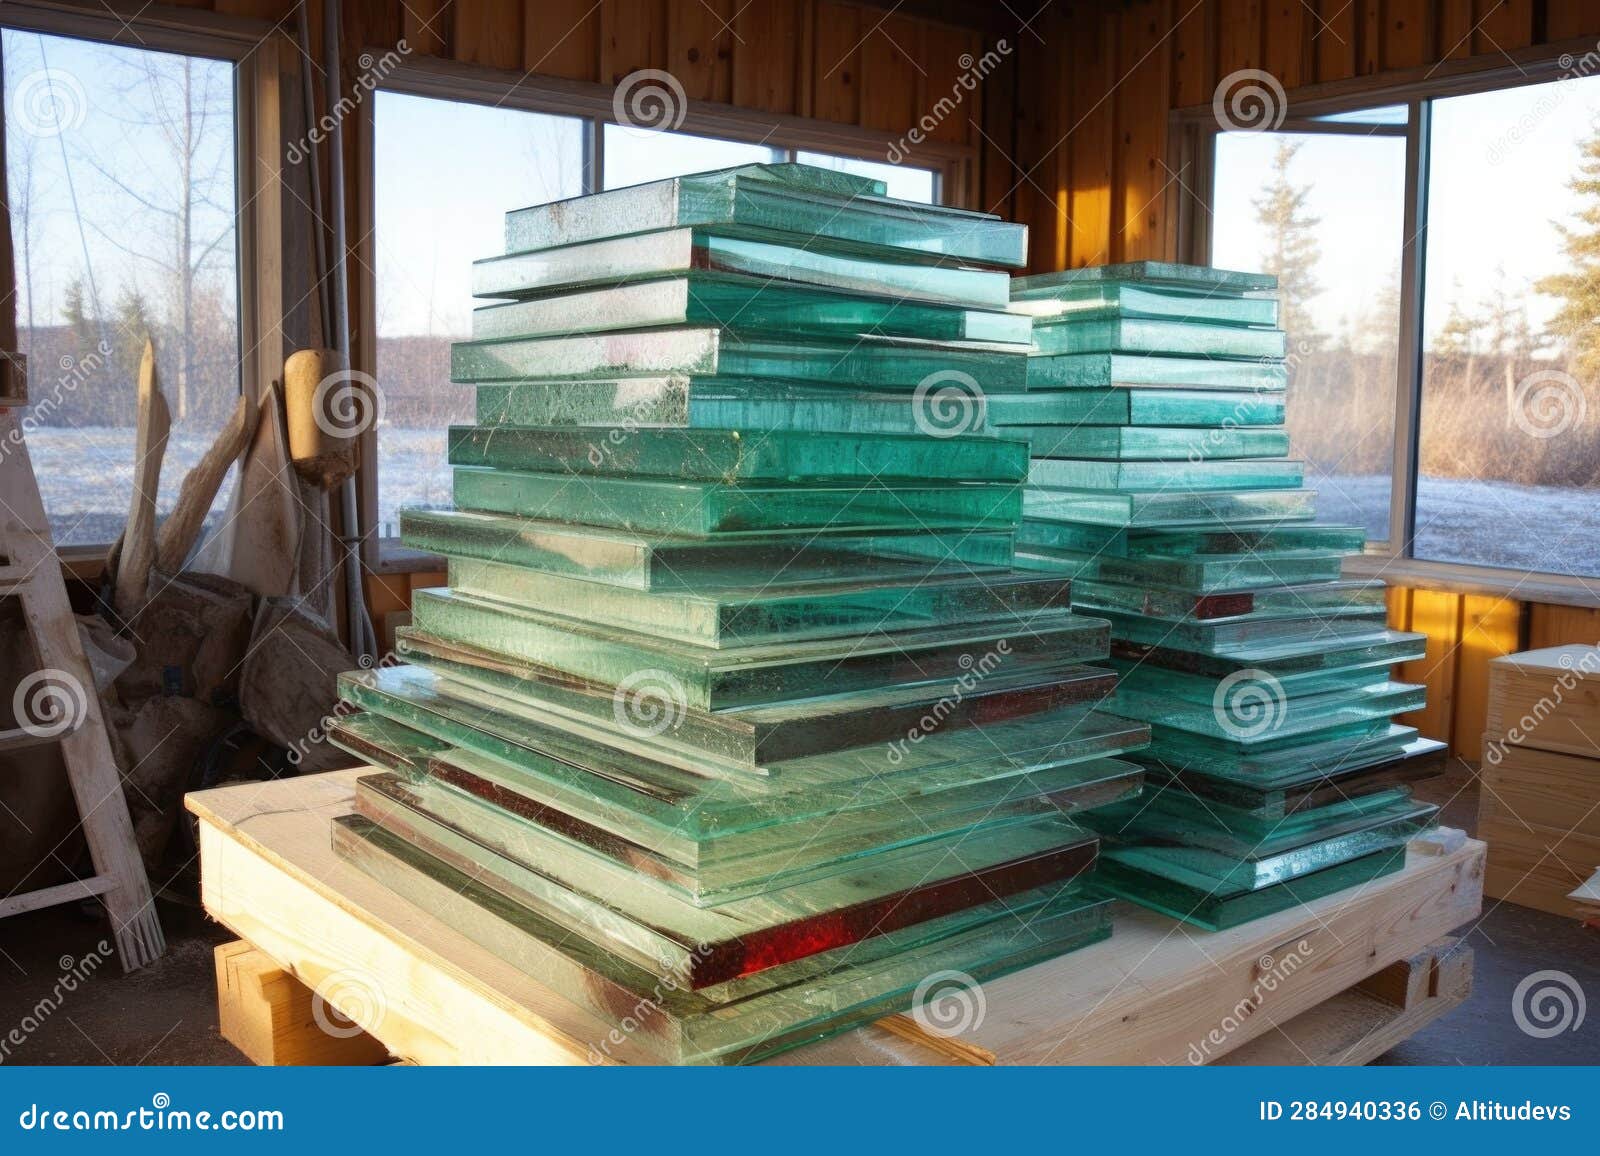 Stack of New Window Glass Panes Ready for Installation Stock Photo ...